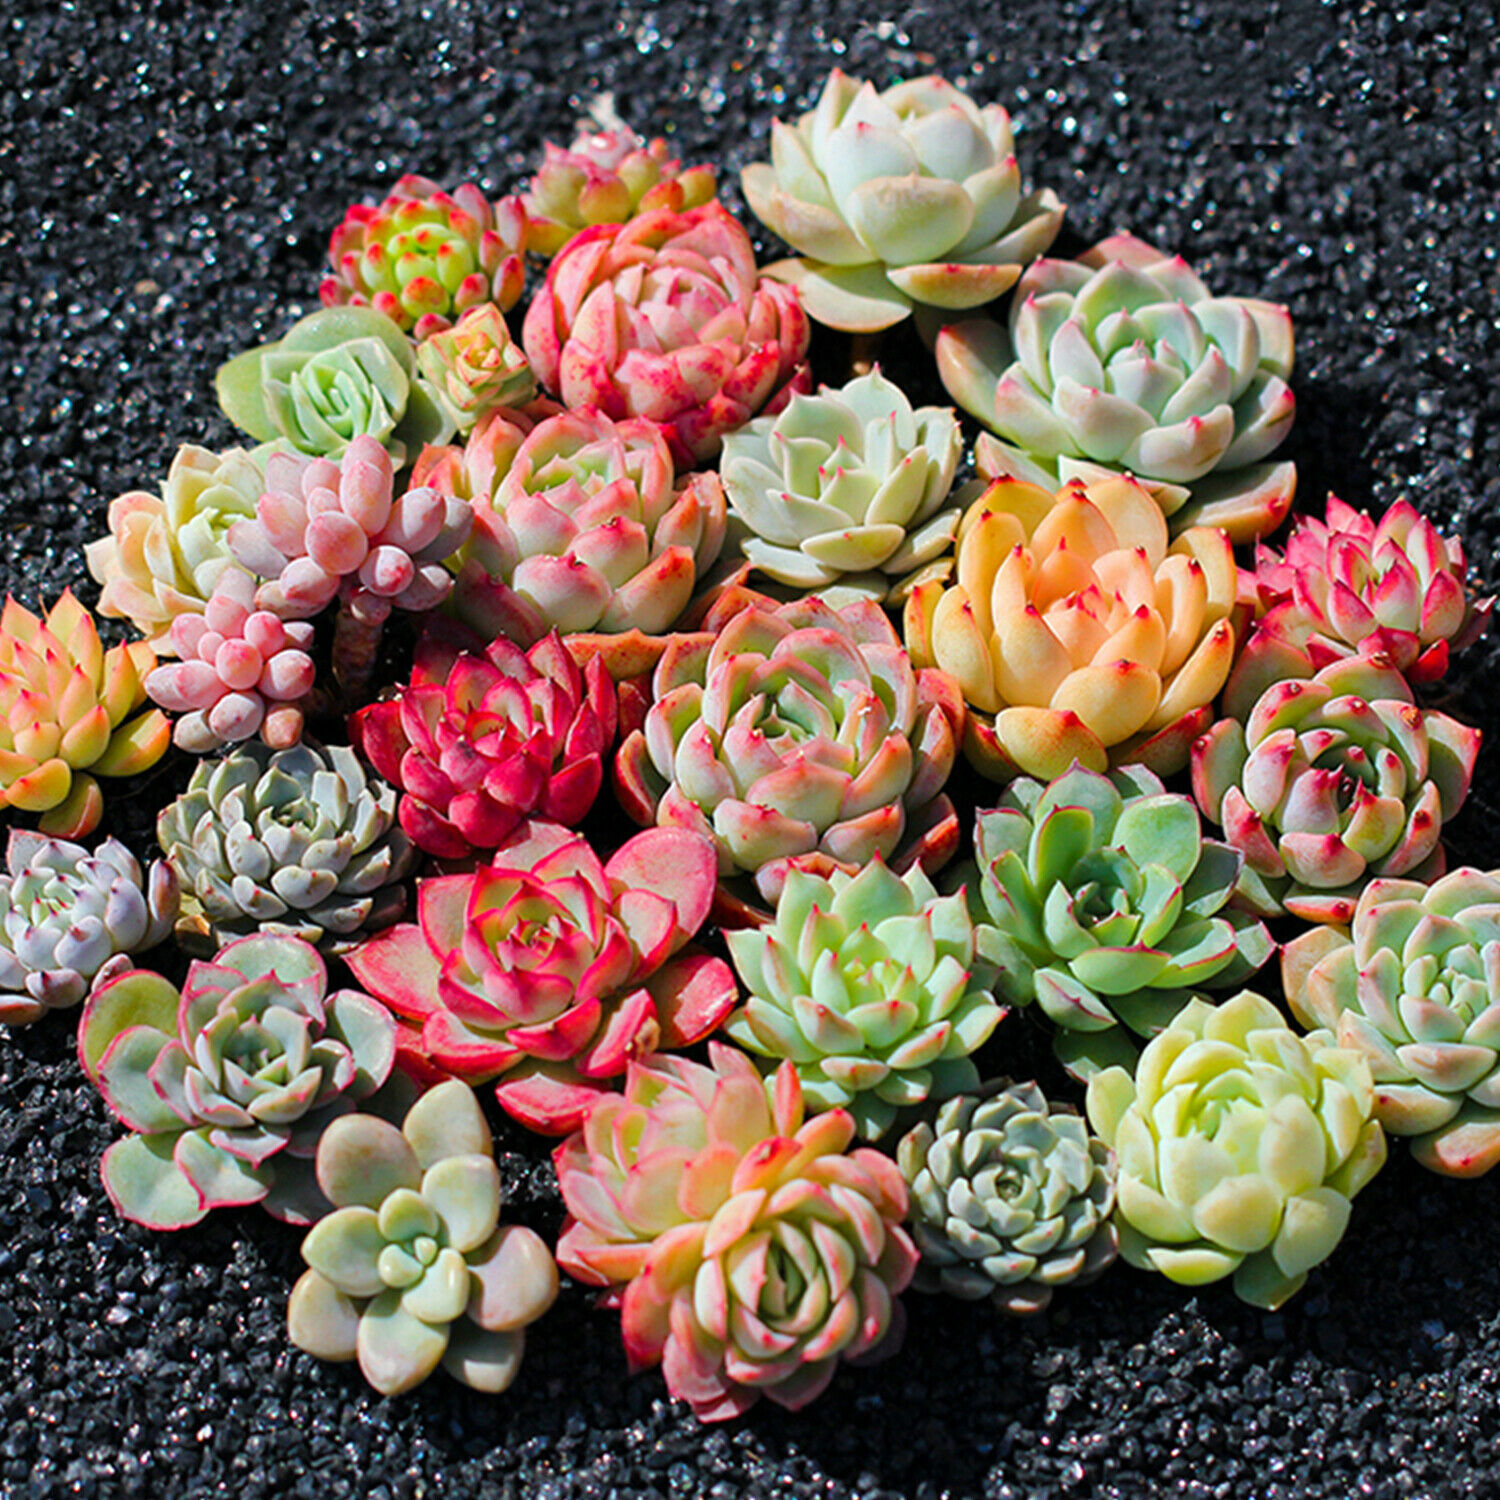 Assorted Rosettes Succulent Plants Mini Fully Rooted In Planter Pots With Soil